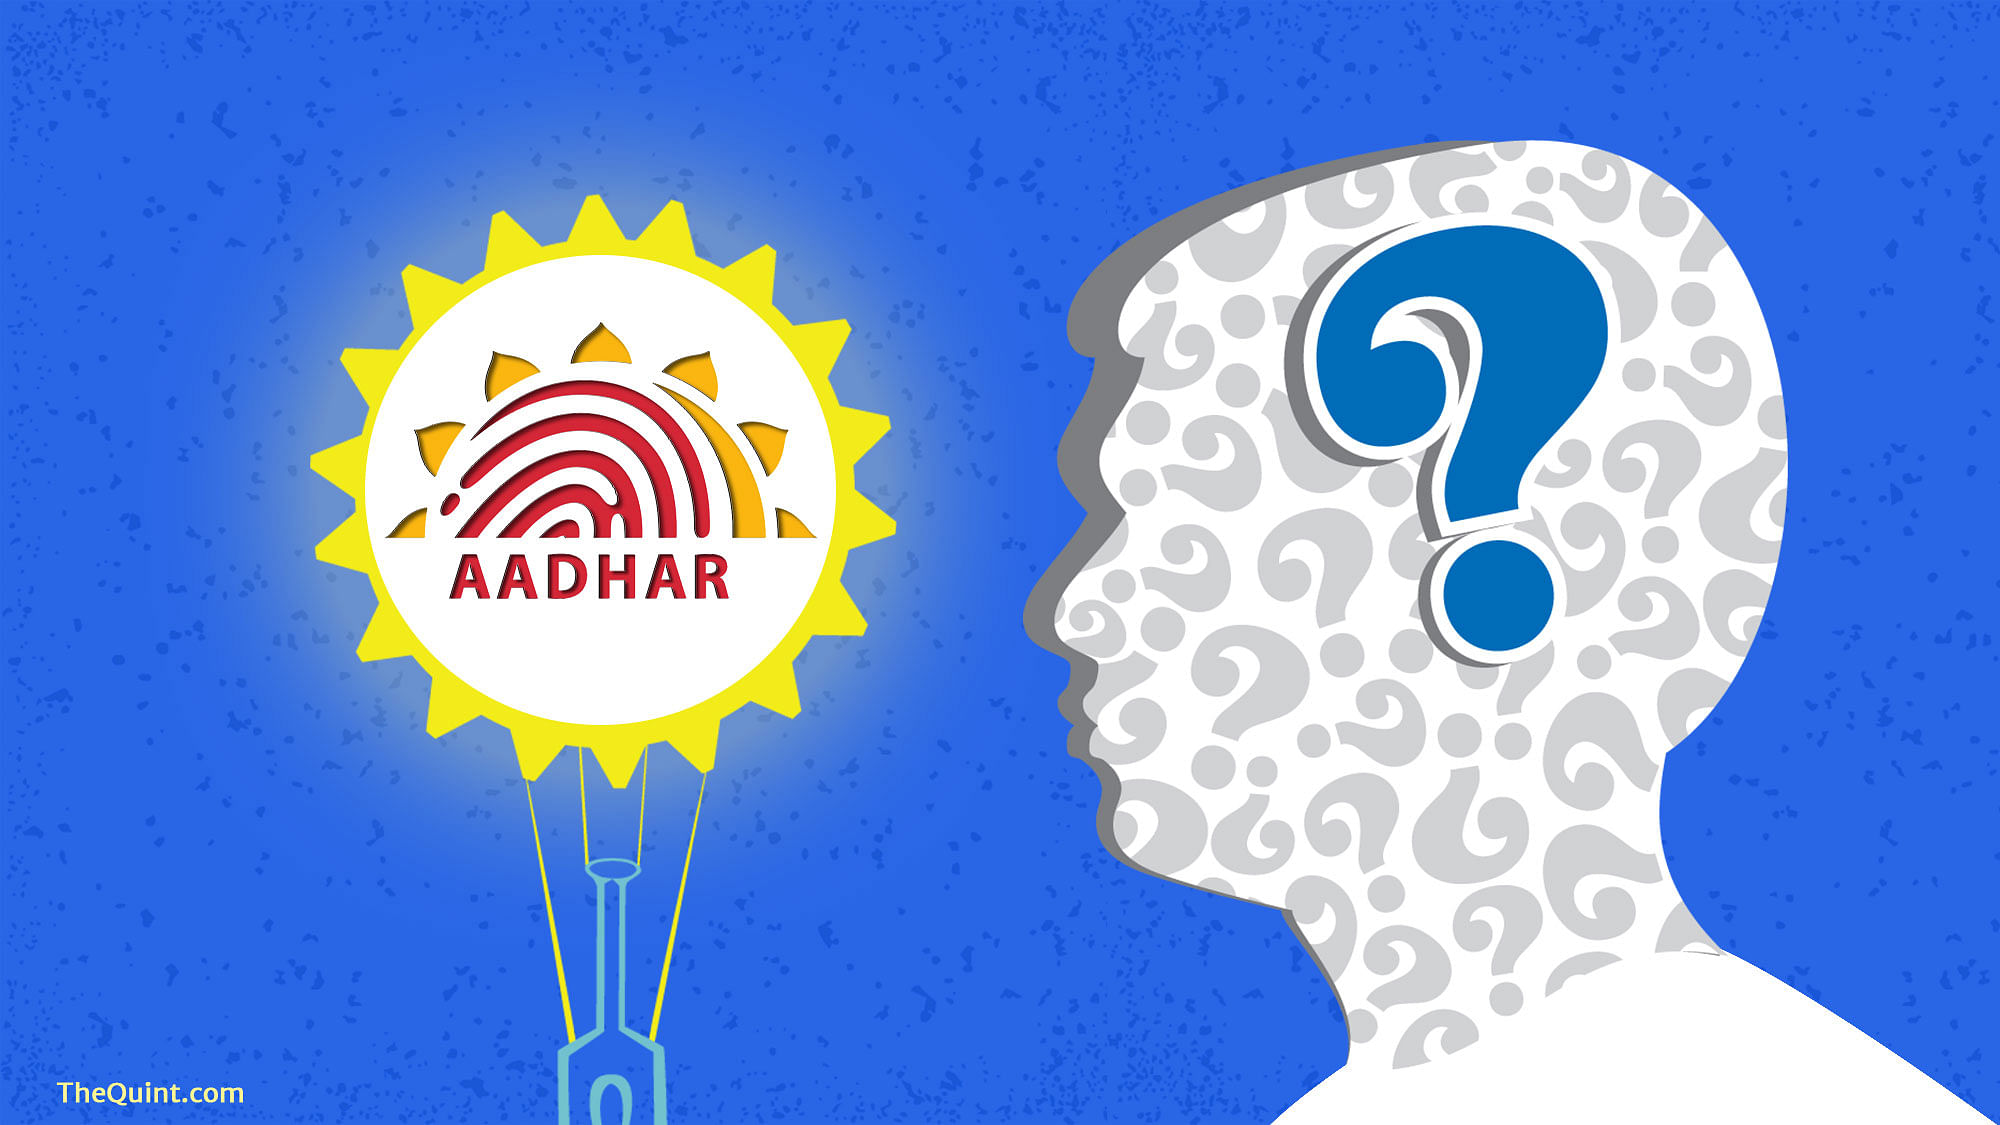 Arguments in the SC have delved into not just Aadhaar, but also privacy in India, civil liberties and democratic rights. (Photo Courtesy: Liju Joseph/<b>The Quint</b>)